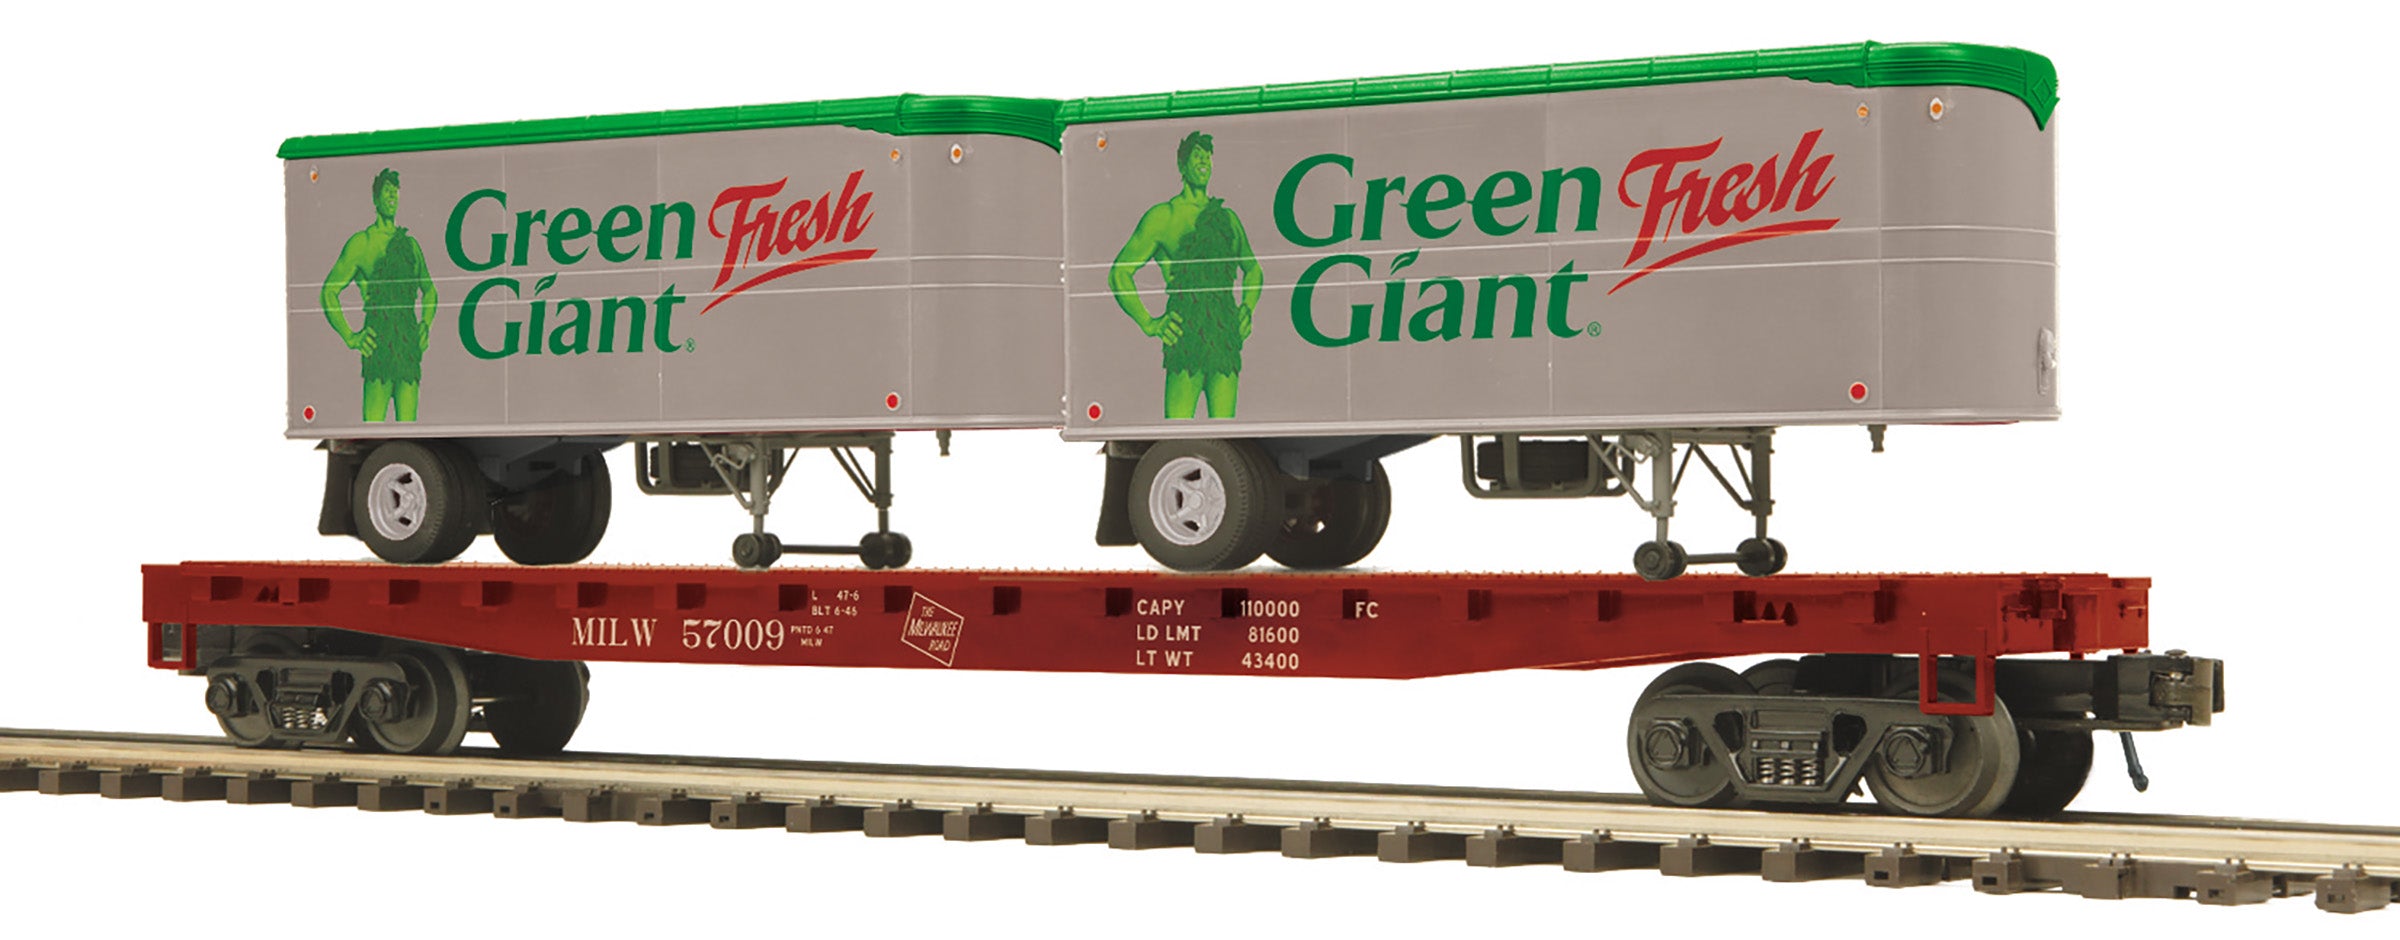 MTH 20-95555 - Flat Car "Milwaukee Road" w/ (2) PUP Trailers (Green Giant)